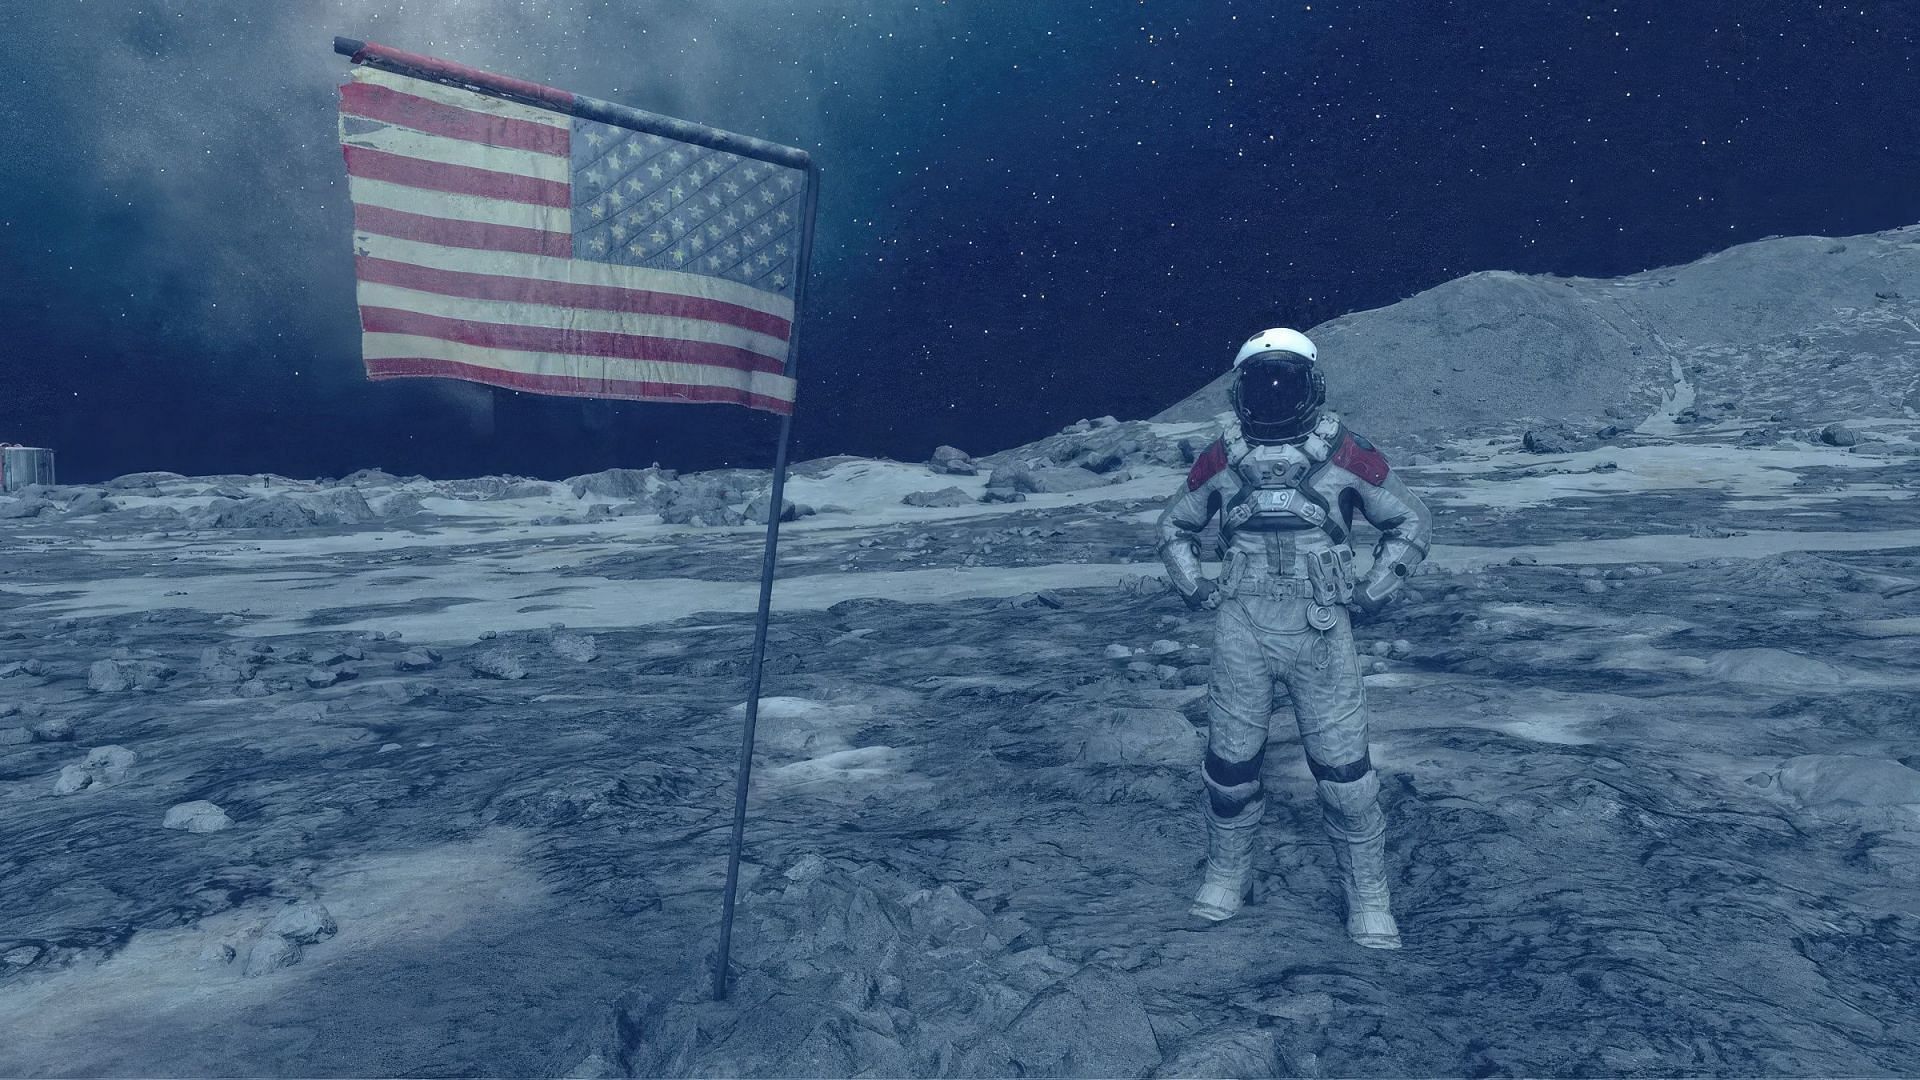 The American flag at the moon landing site (Image via Bethesda)